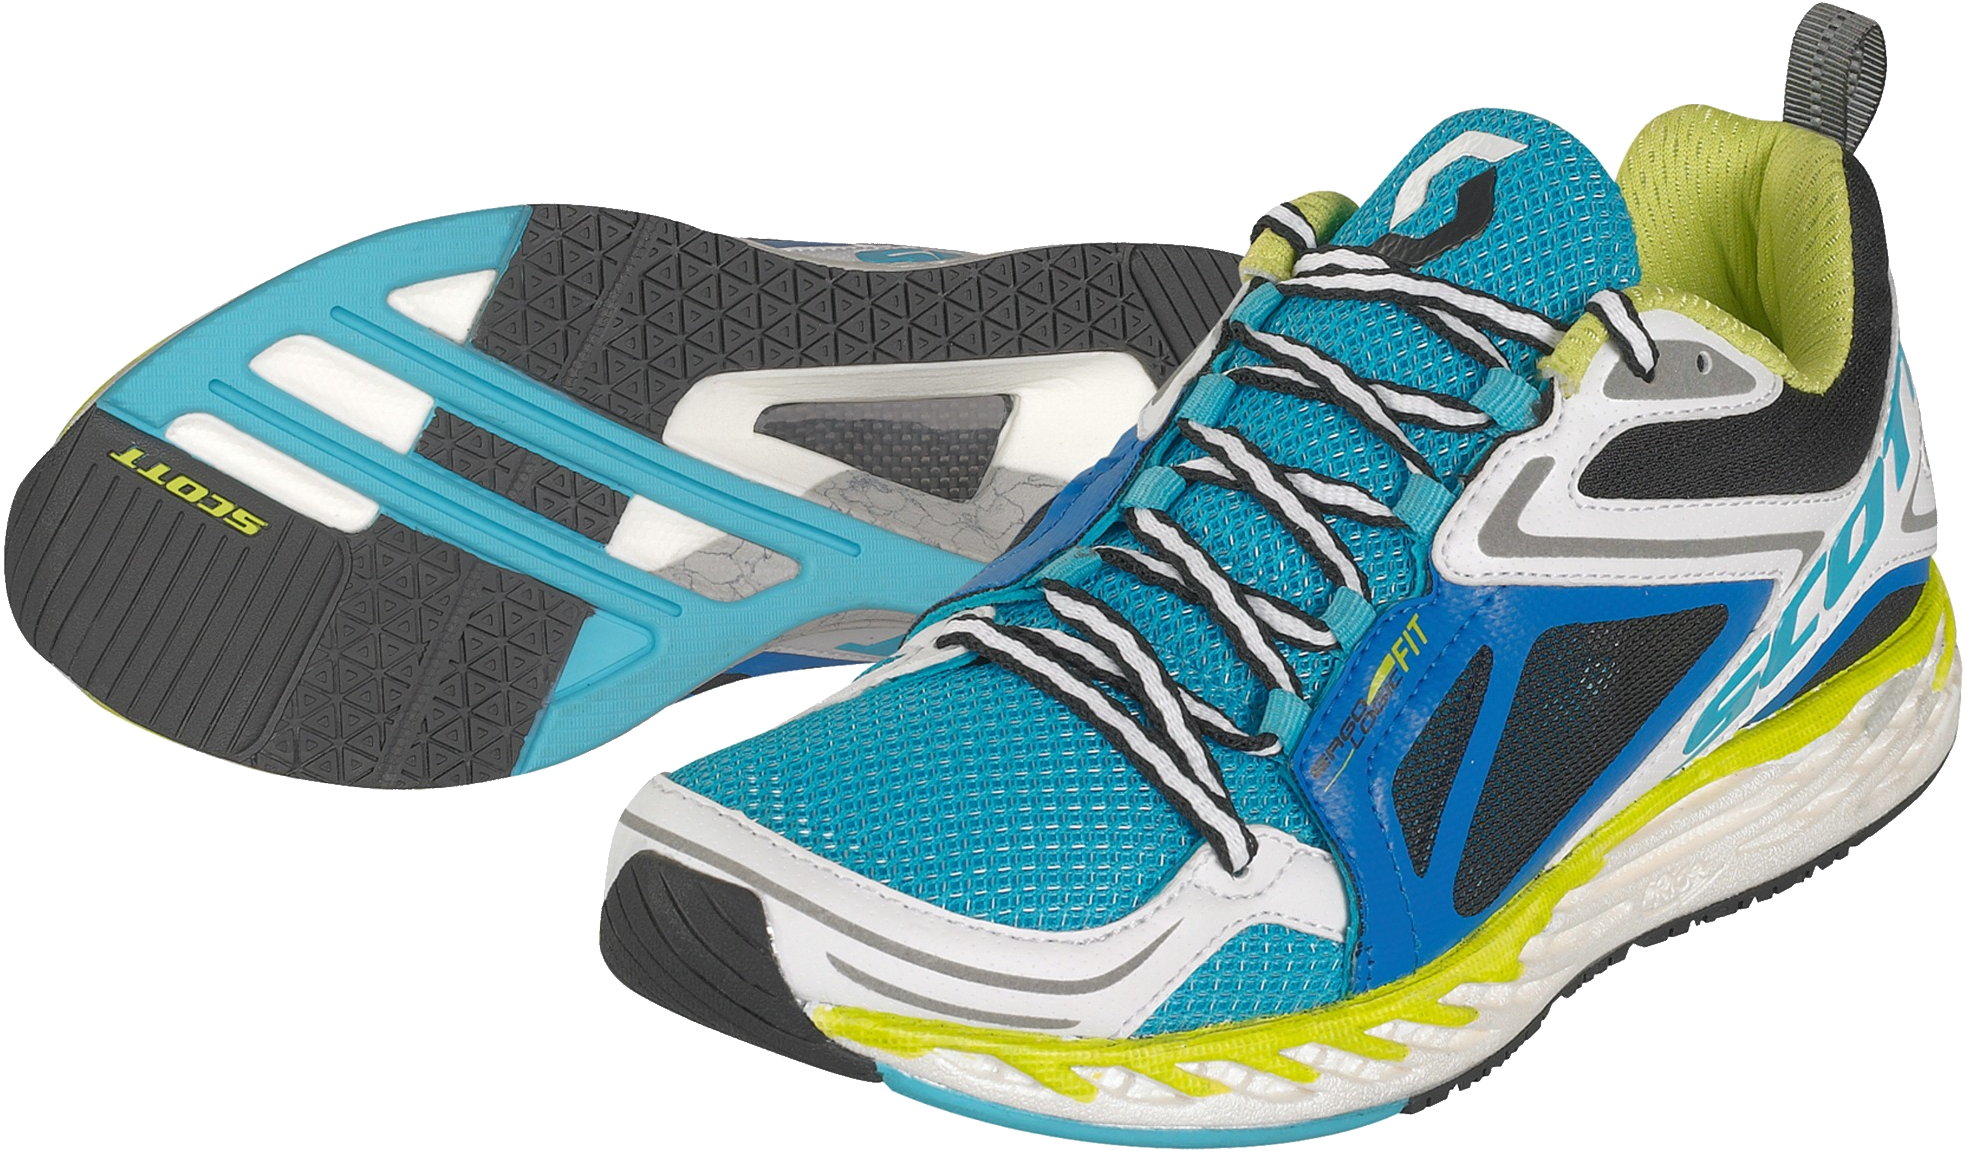 Running Shoes Png Image - Running Shoes, Transparent background PNG HD thumbnail